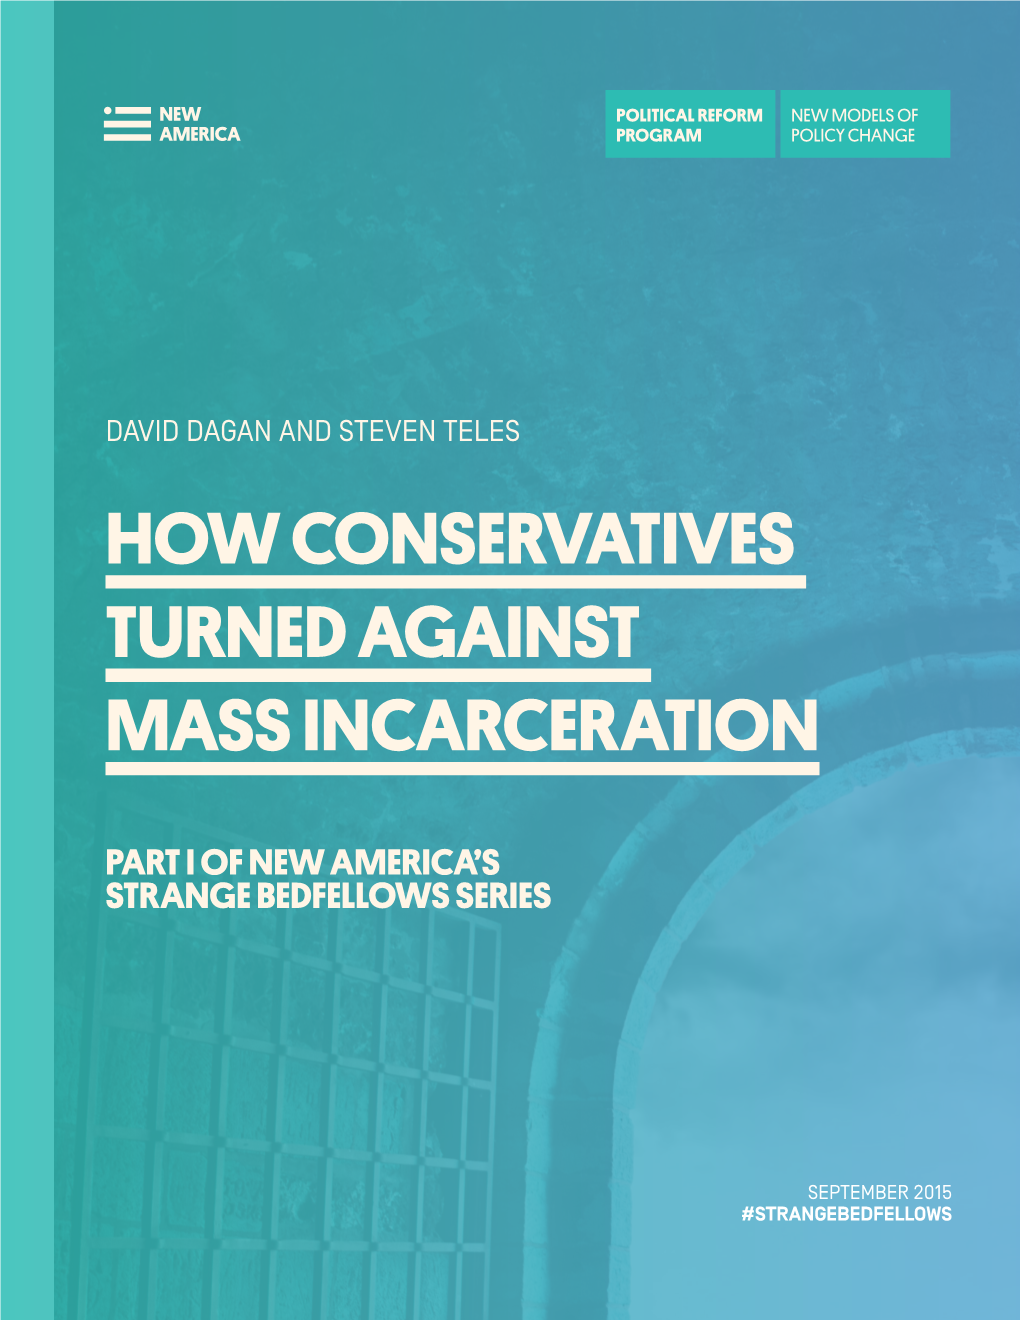 How Conservatives Turned Against Mass Incarceration